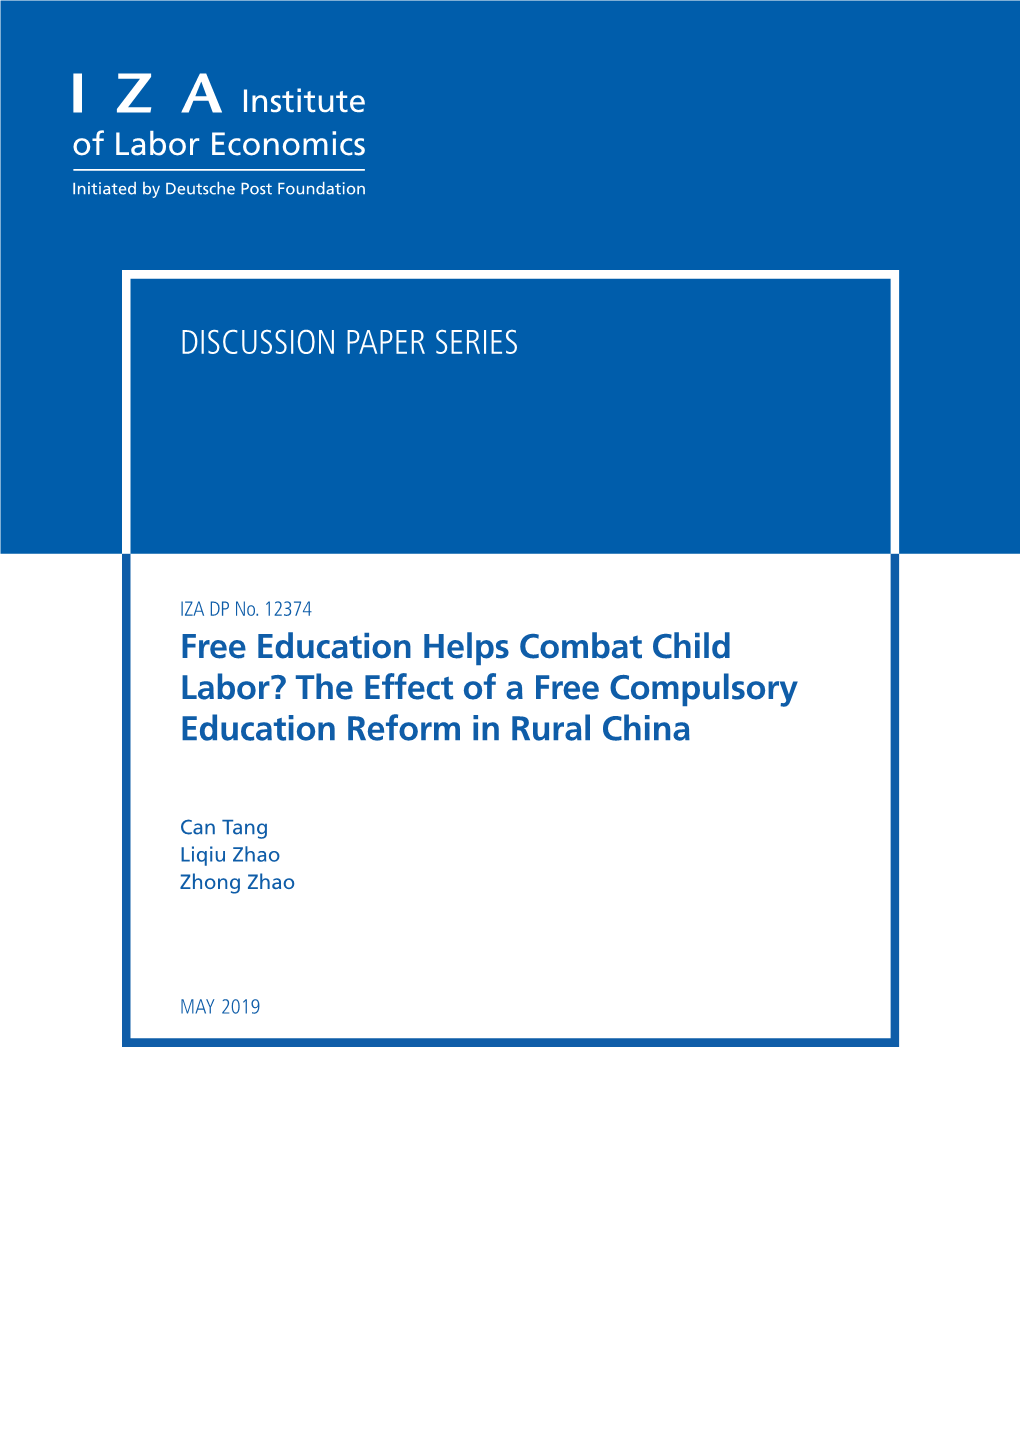 Free Education Helps Combat Child Labor? the Effect of a Free Compulsory Education Reform in Rural China